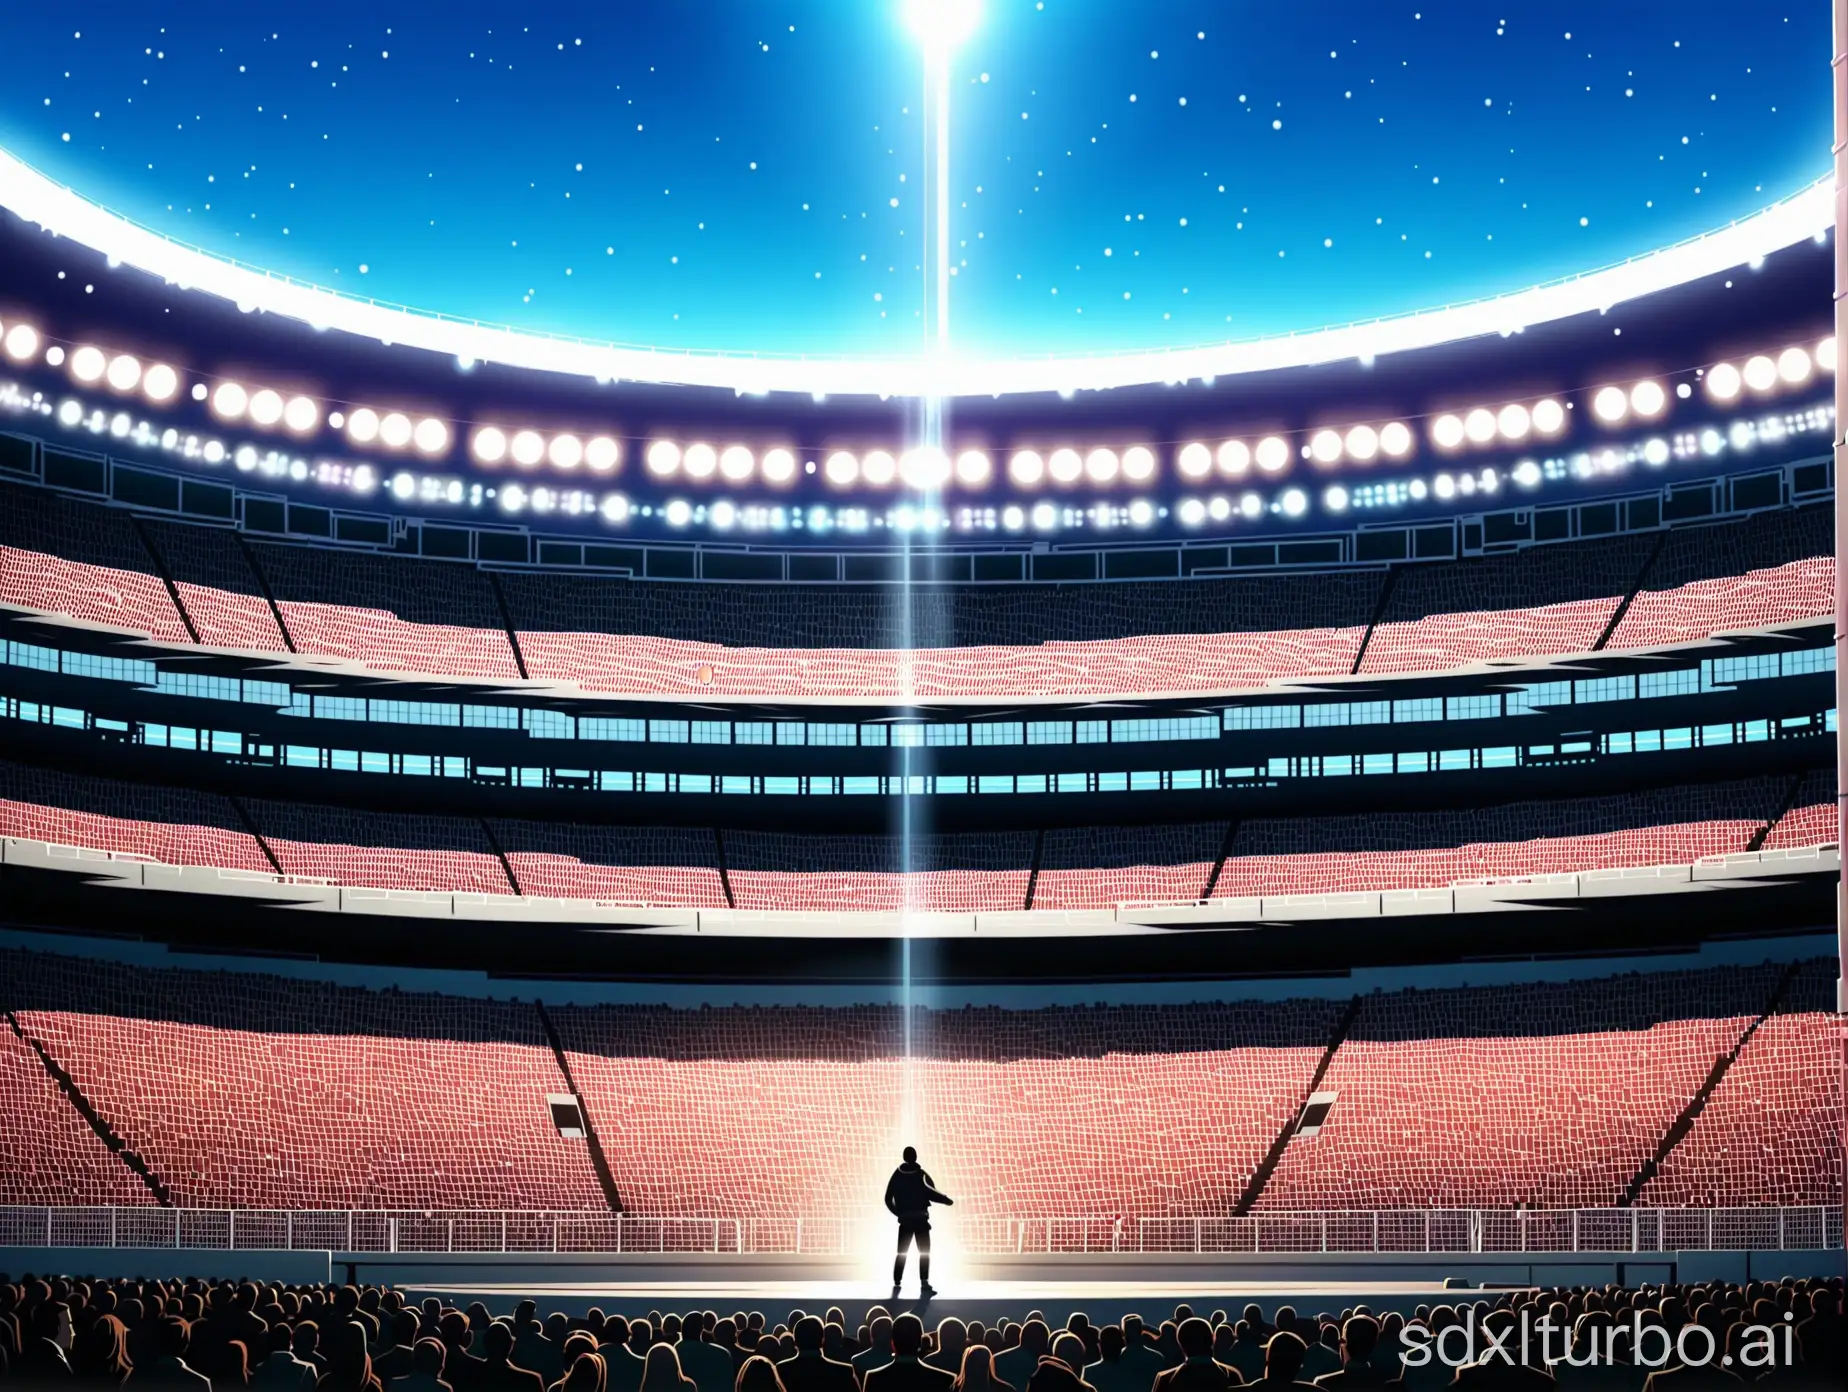 Comic style, a man standing on stage, a large crowd of people kneeling to him below the stage, stage, stadium, outdoors, sky, high definition, 4K, bright light, medium distance shot